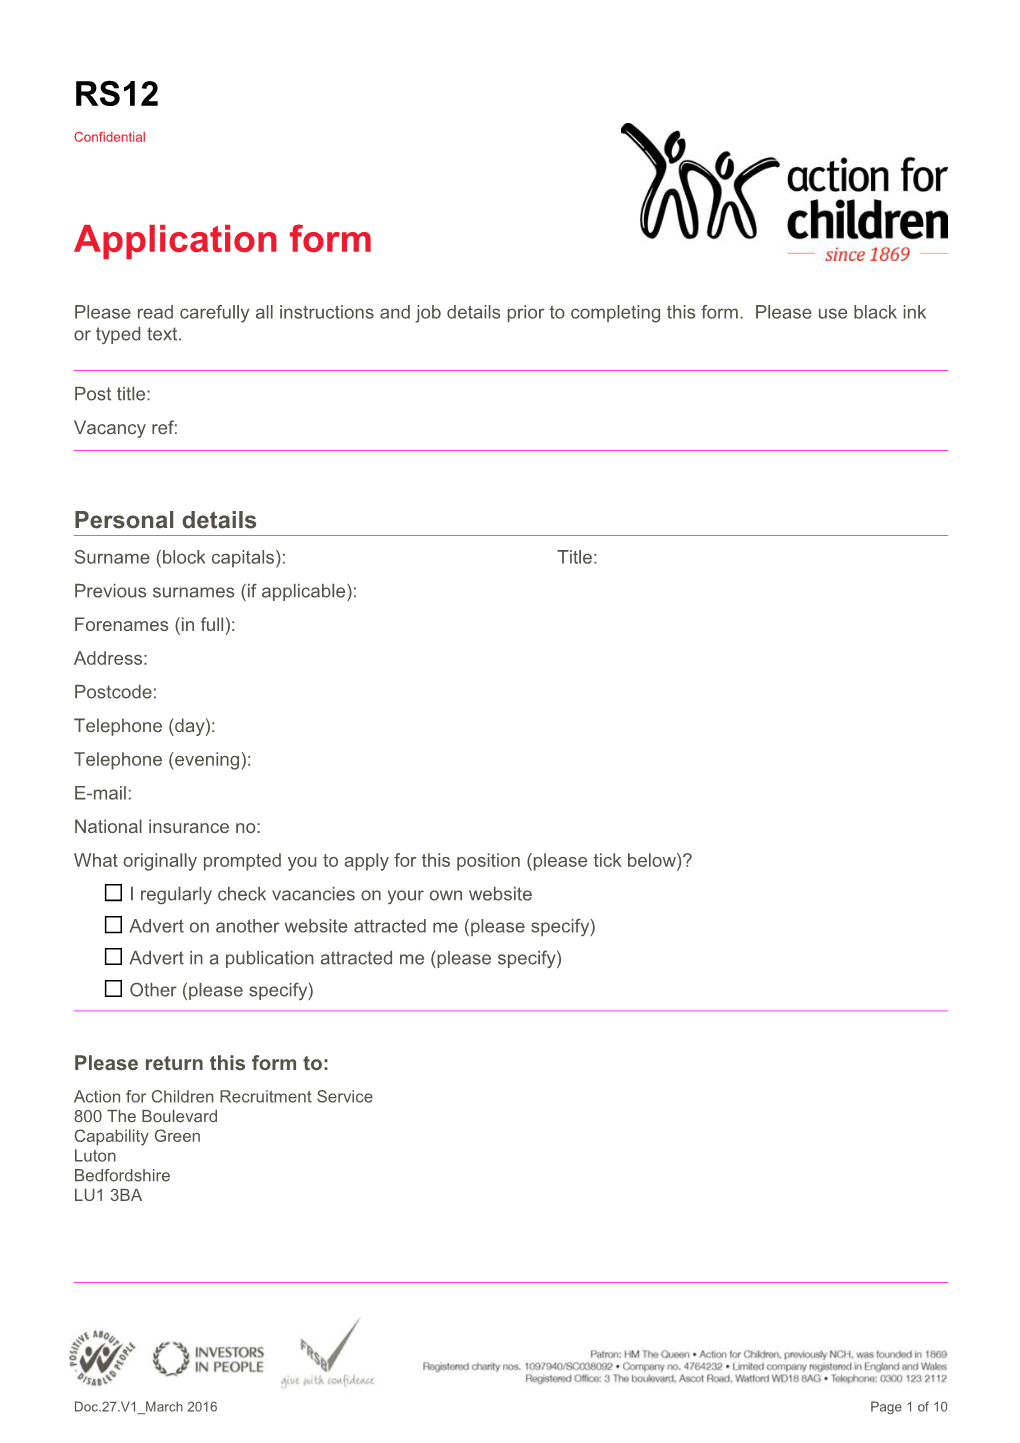 Application Form s16